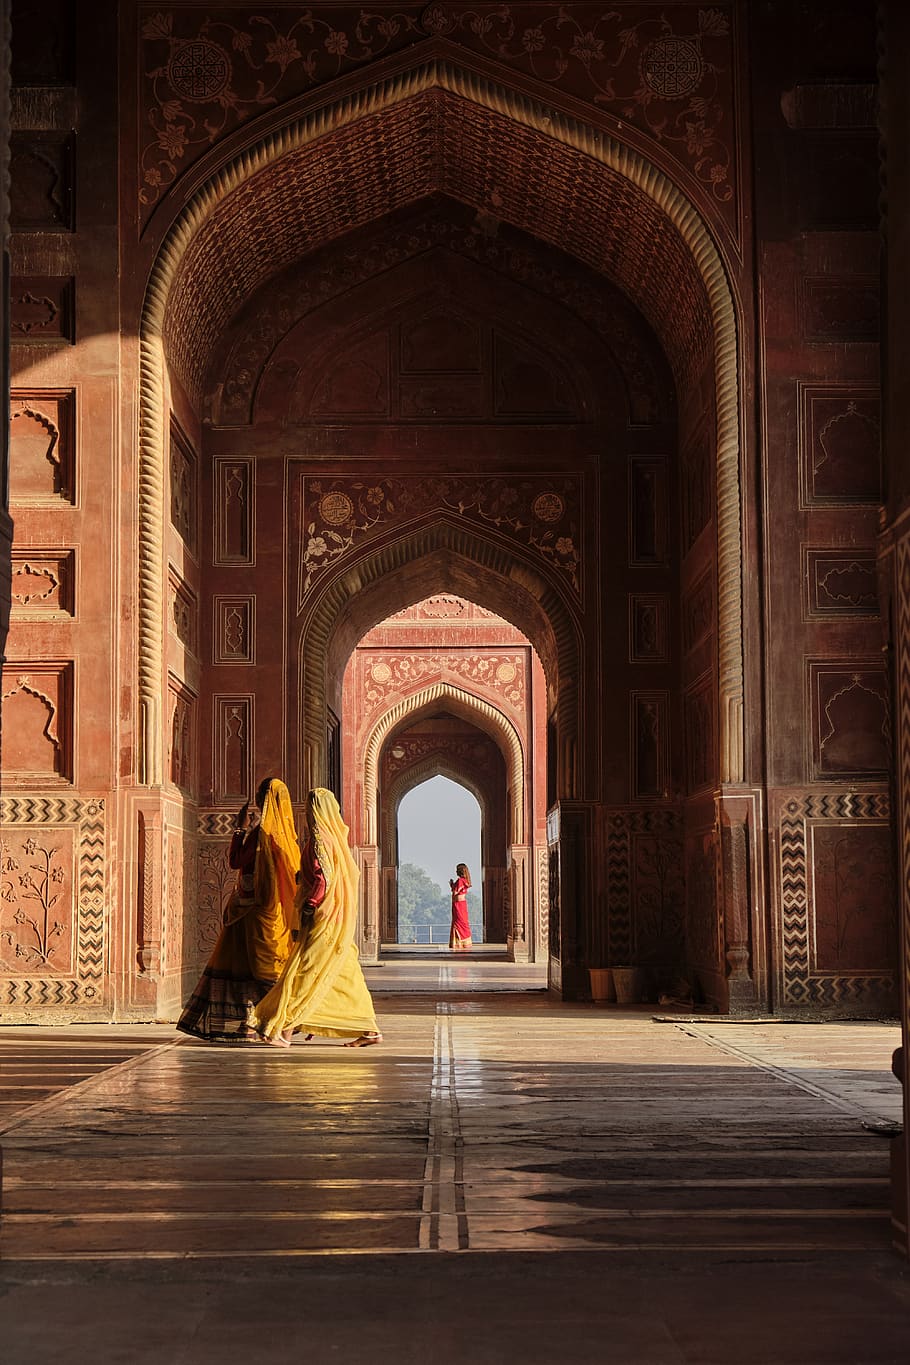 agra, kau ban mosque, morning, woman, people, dresses, colors, light, walking, india